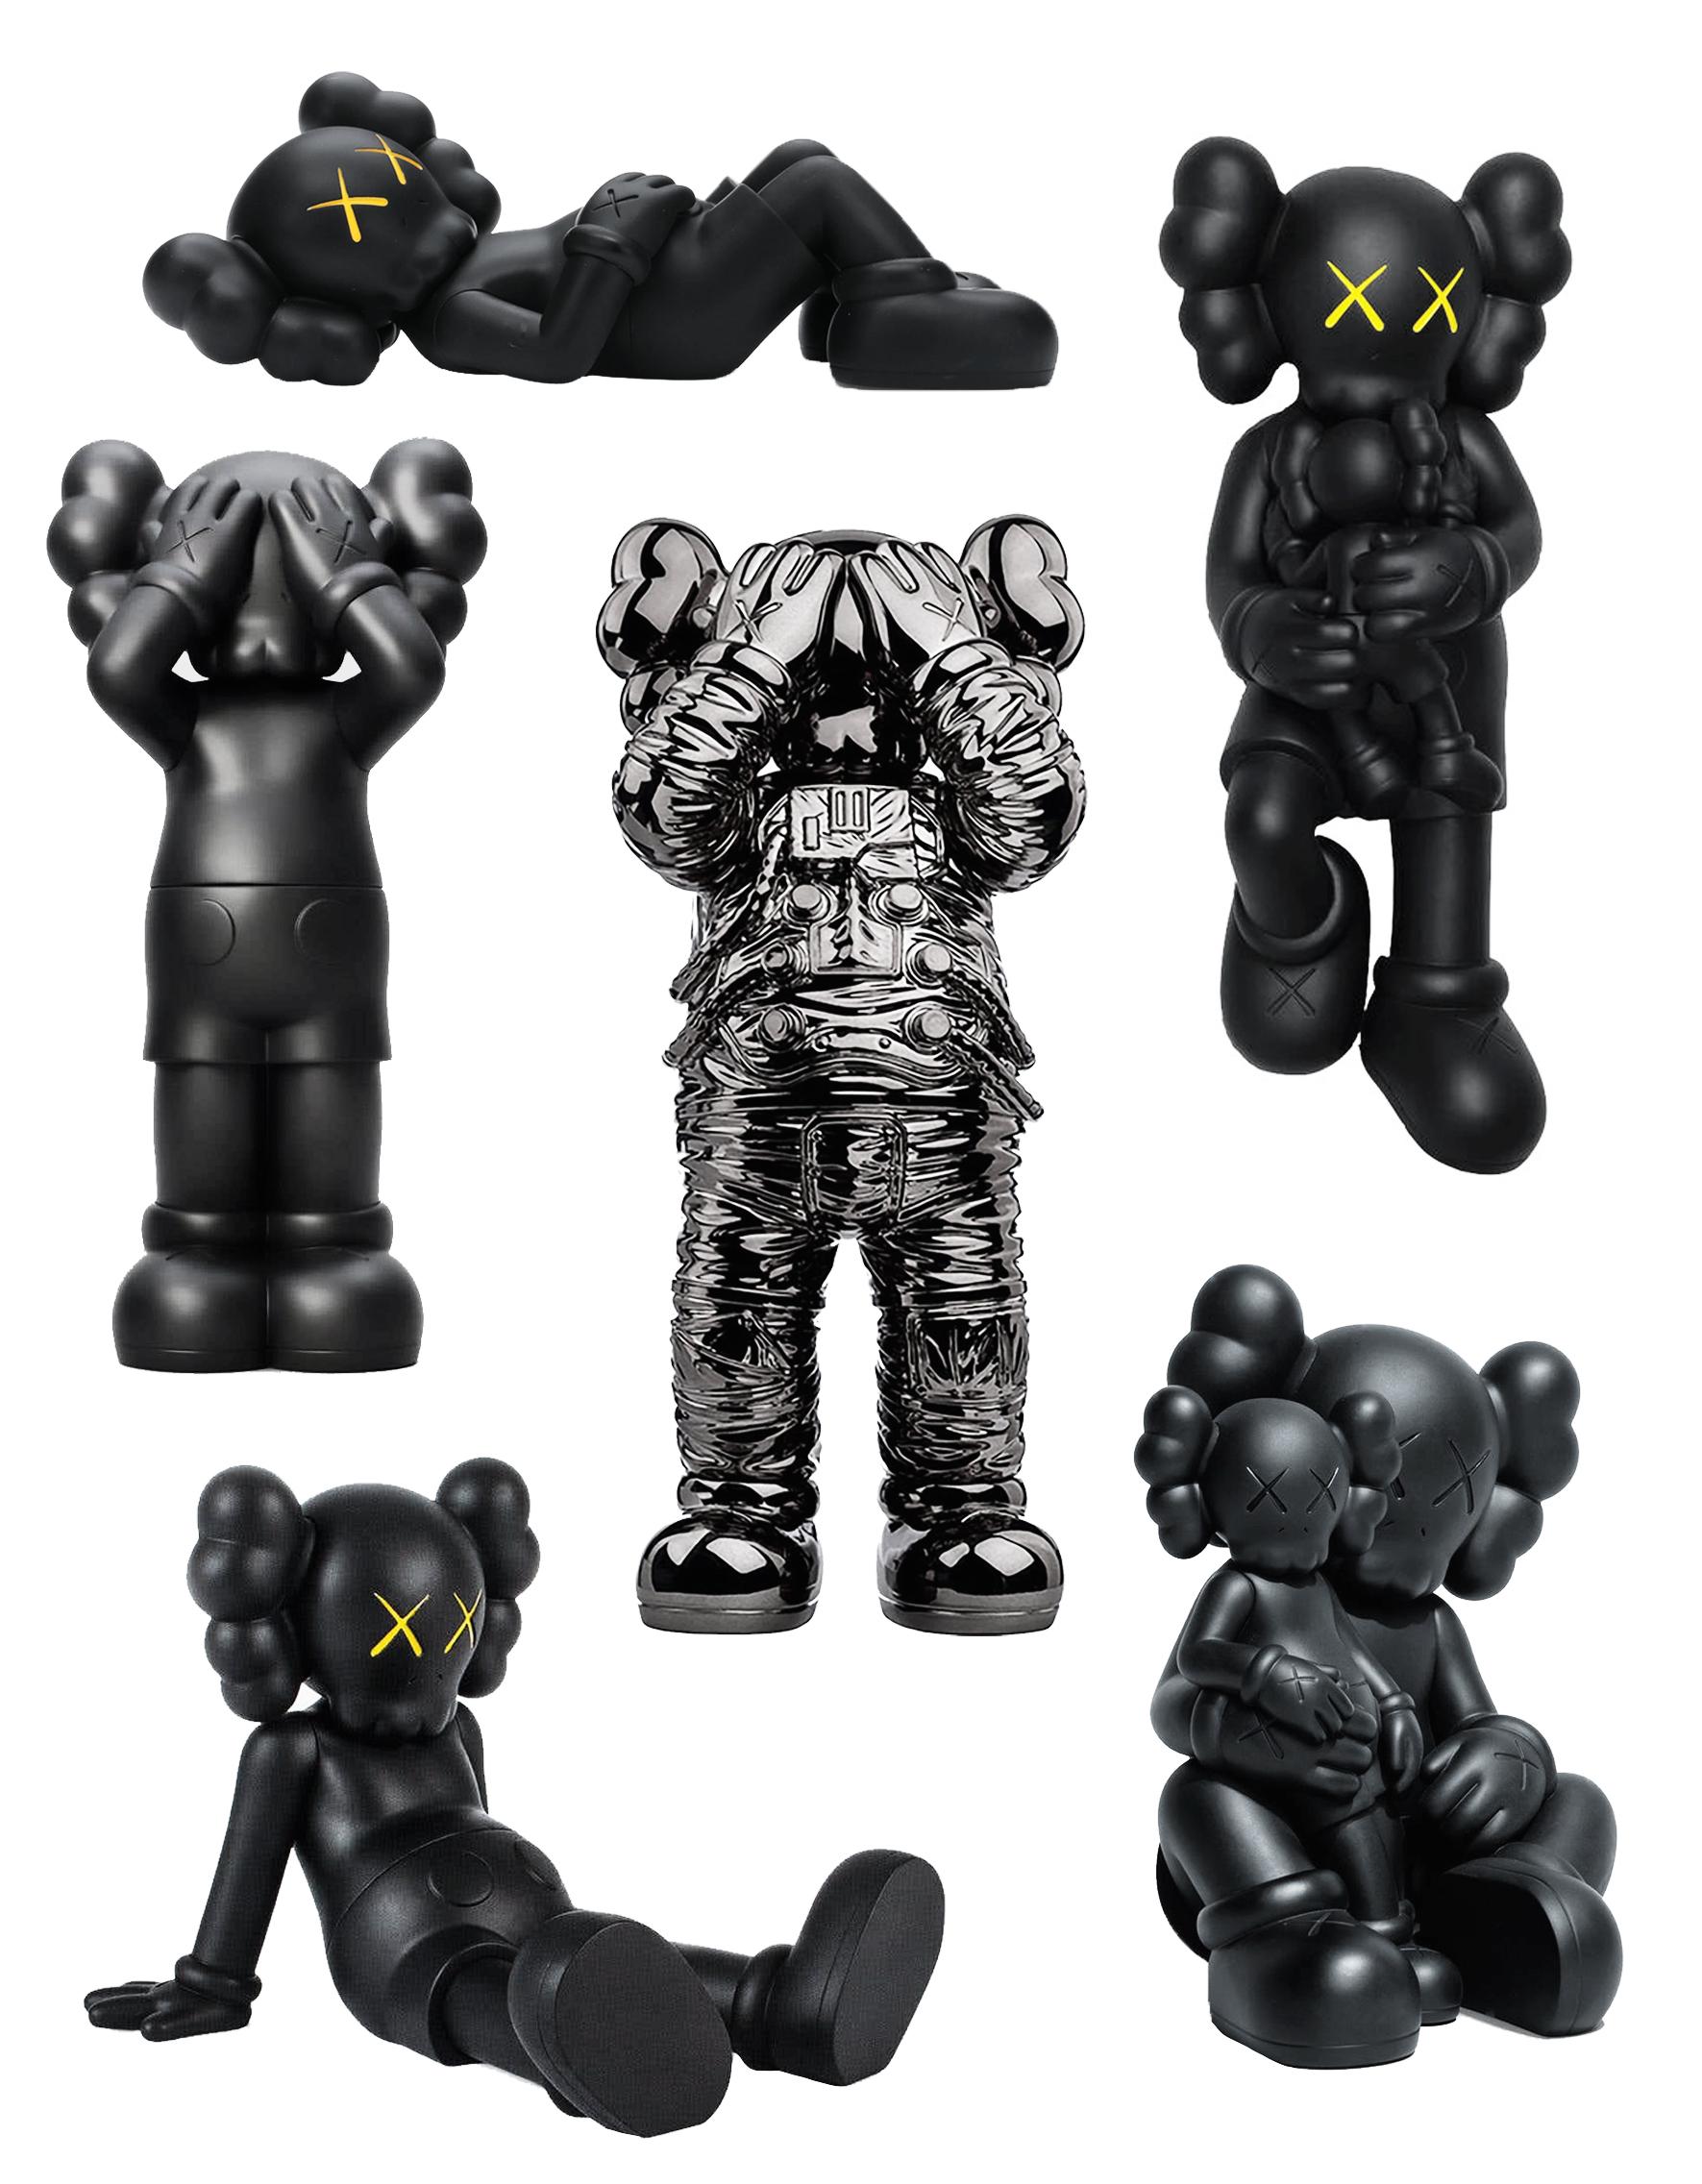 https://a.1stdibscdn.com/kaws-sculptures-kaws-holiday-collection-of-30-works-kaws-holiday-companion-2018-2022-for-sale-picture-2/a_3543/a_105699321658269024730/SET2_master.jpg